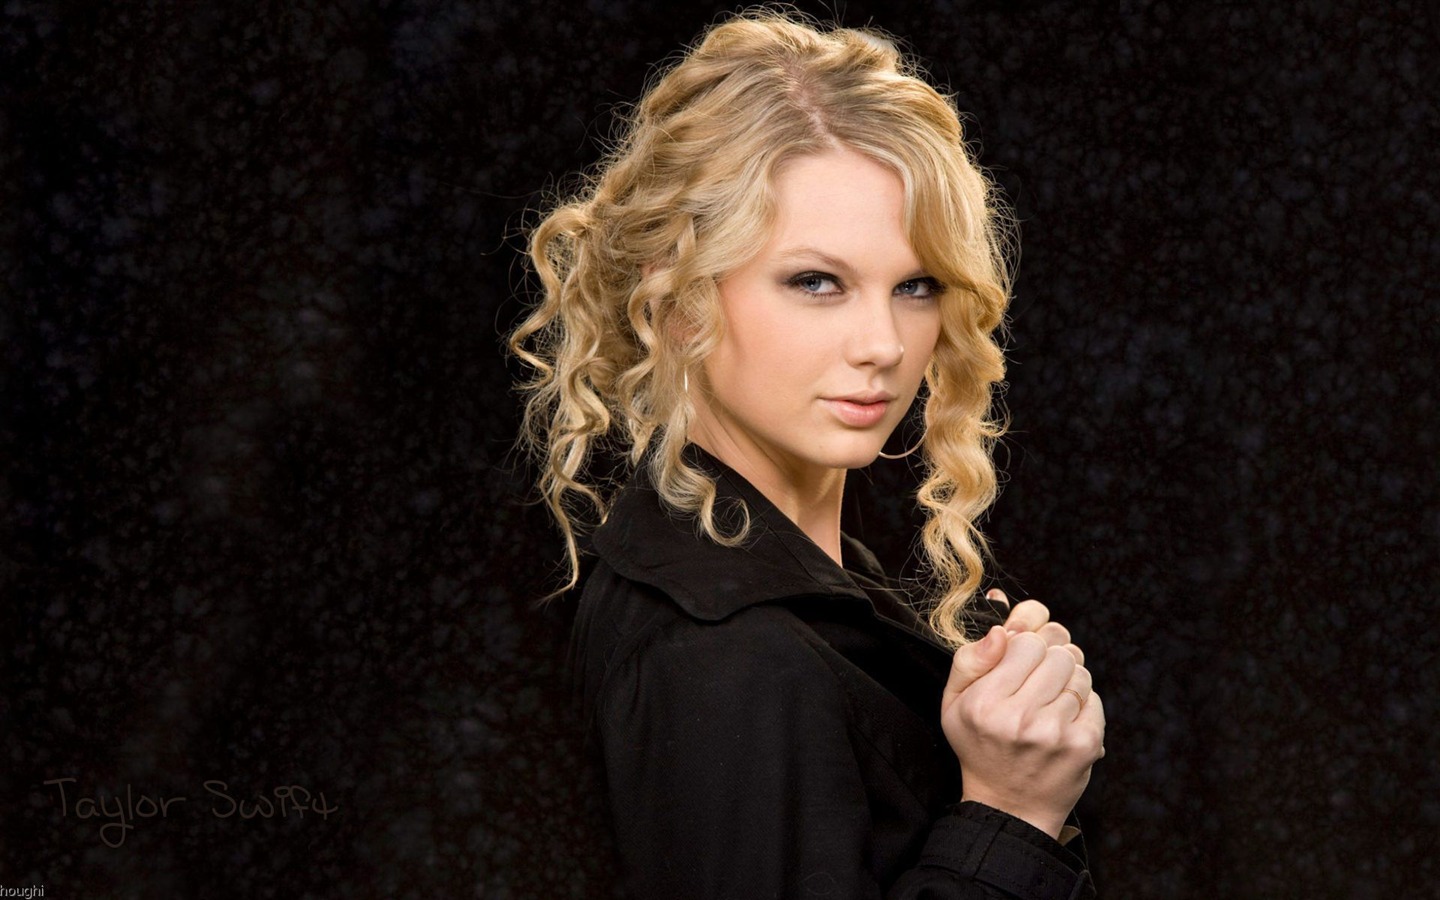 Taylor Swift #043 - 1440x900 Wallpapers Pictures Photos Images